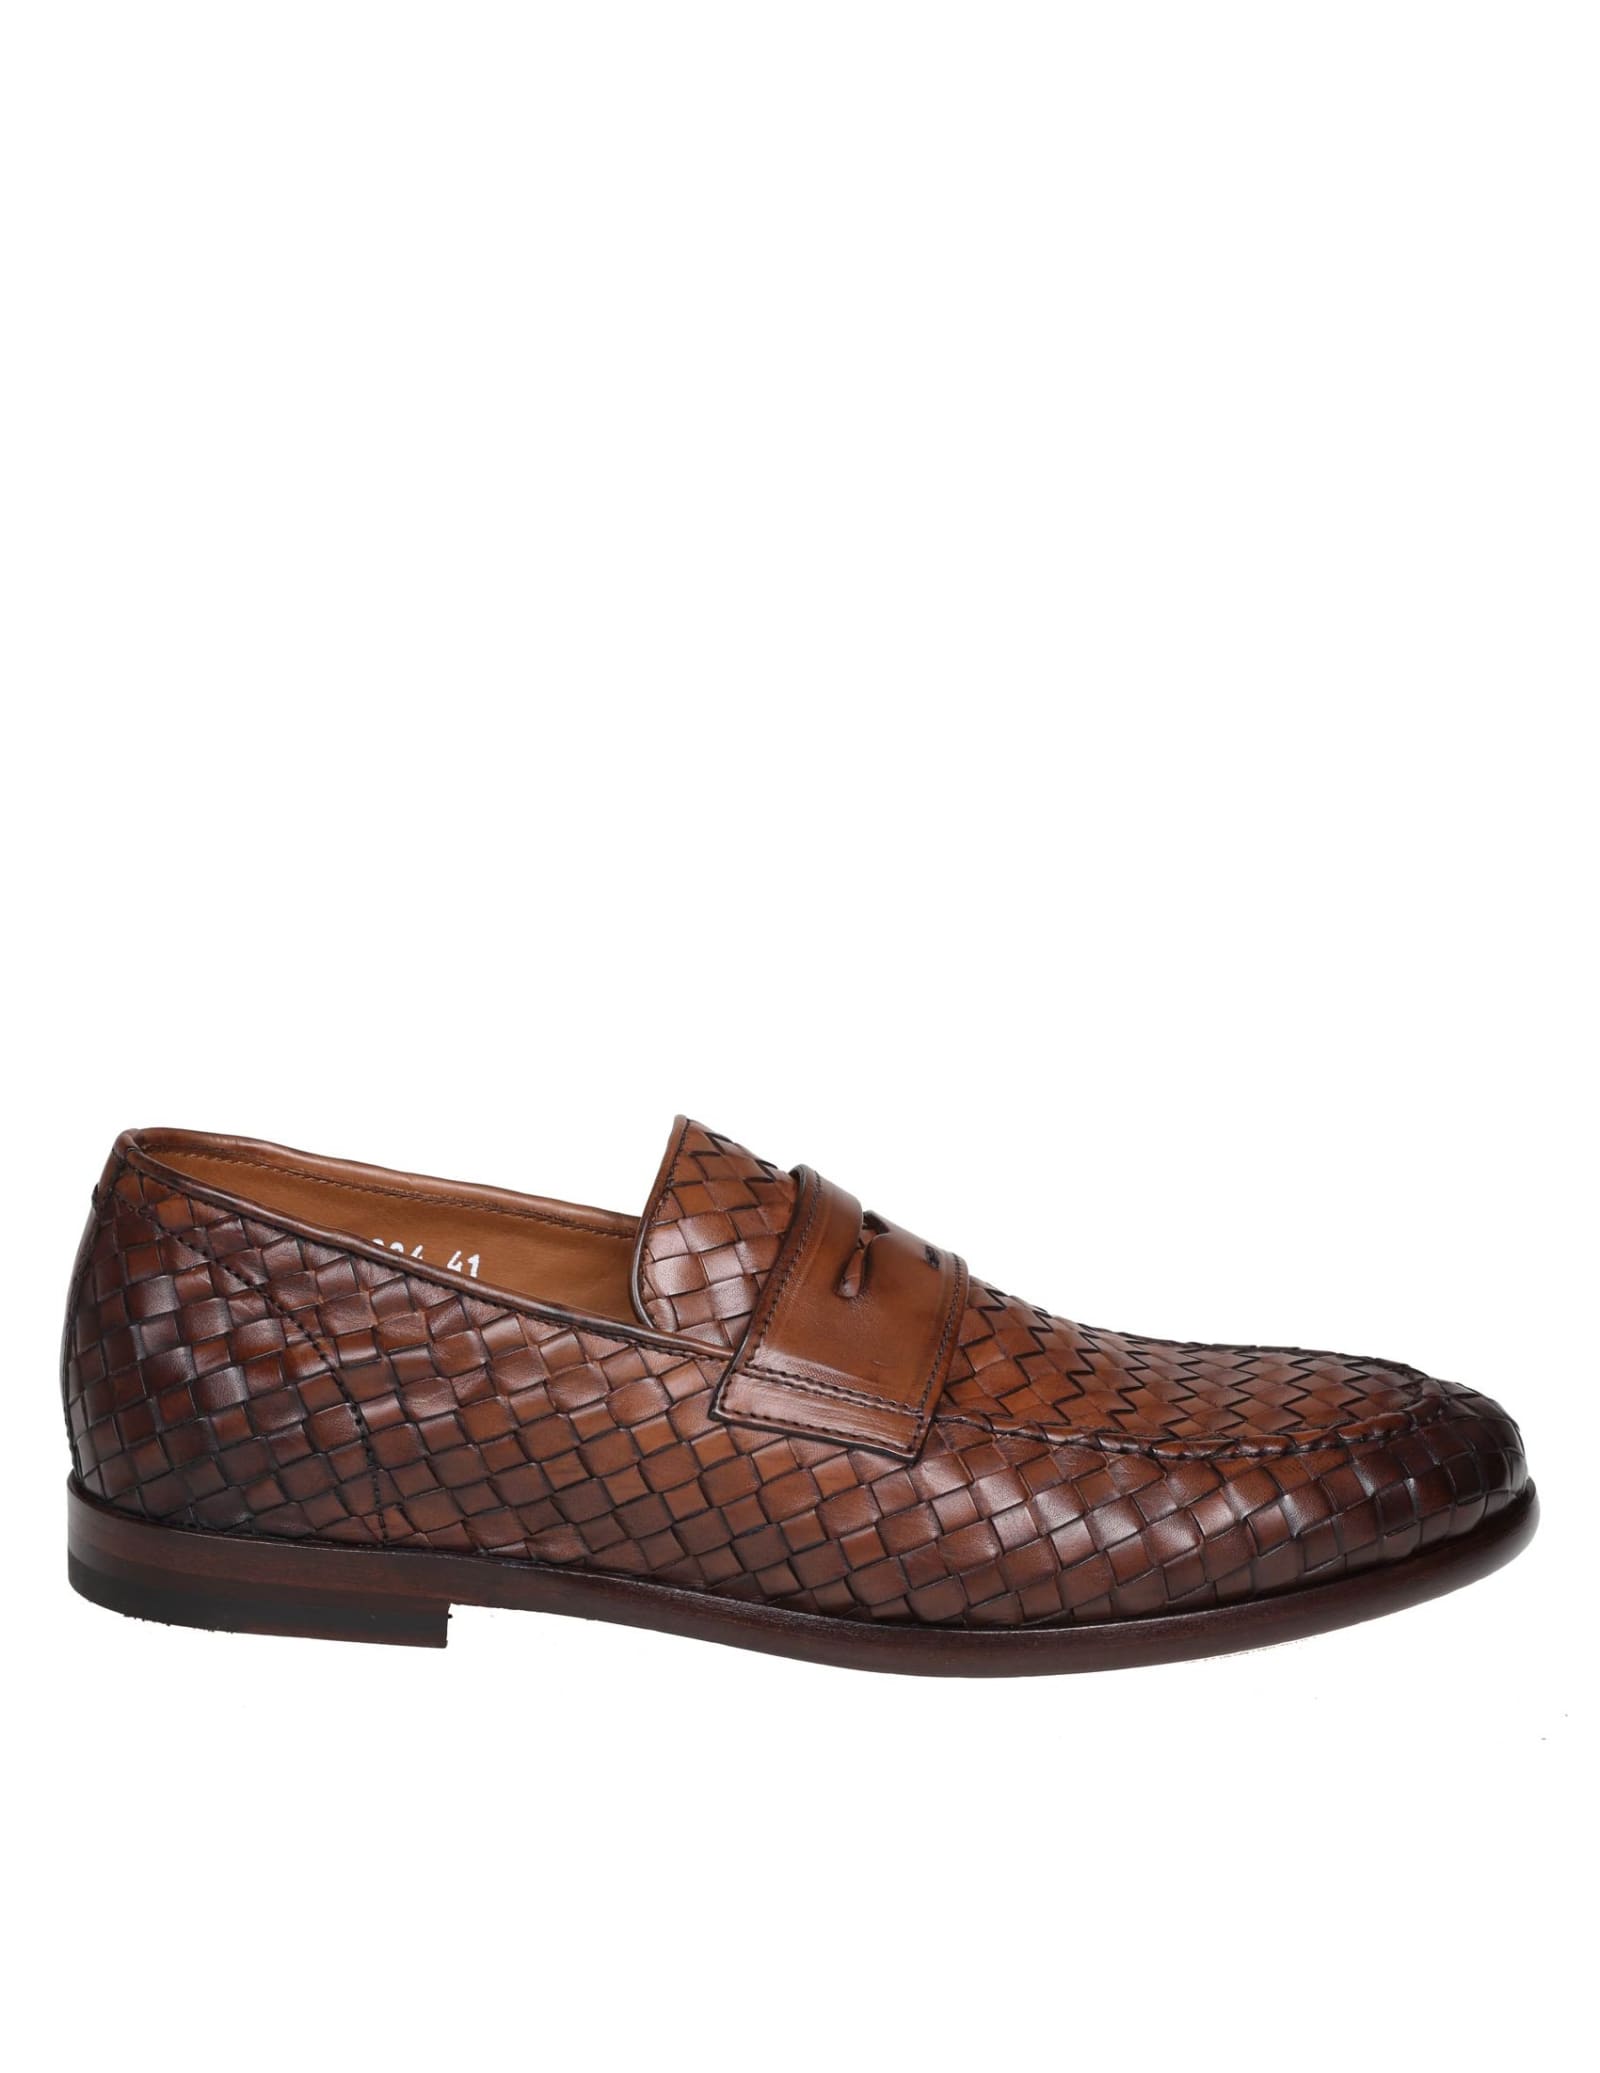 DOUCAL'S PENNY LOAFER IN BRAIDED LEATHER COLOR